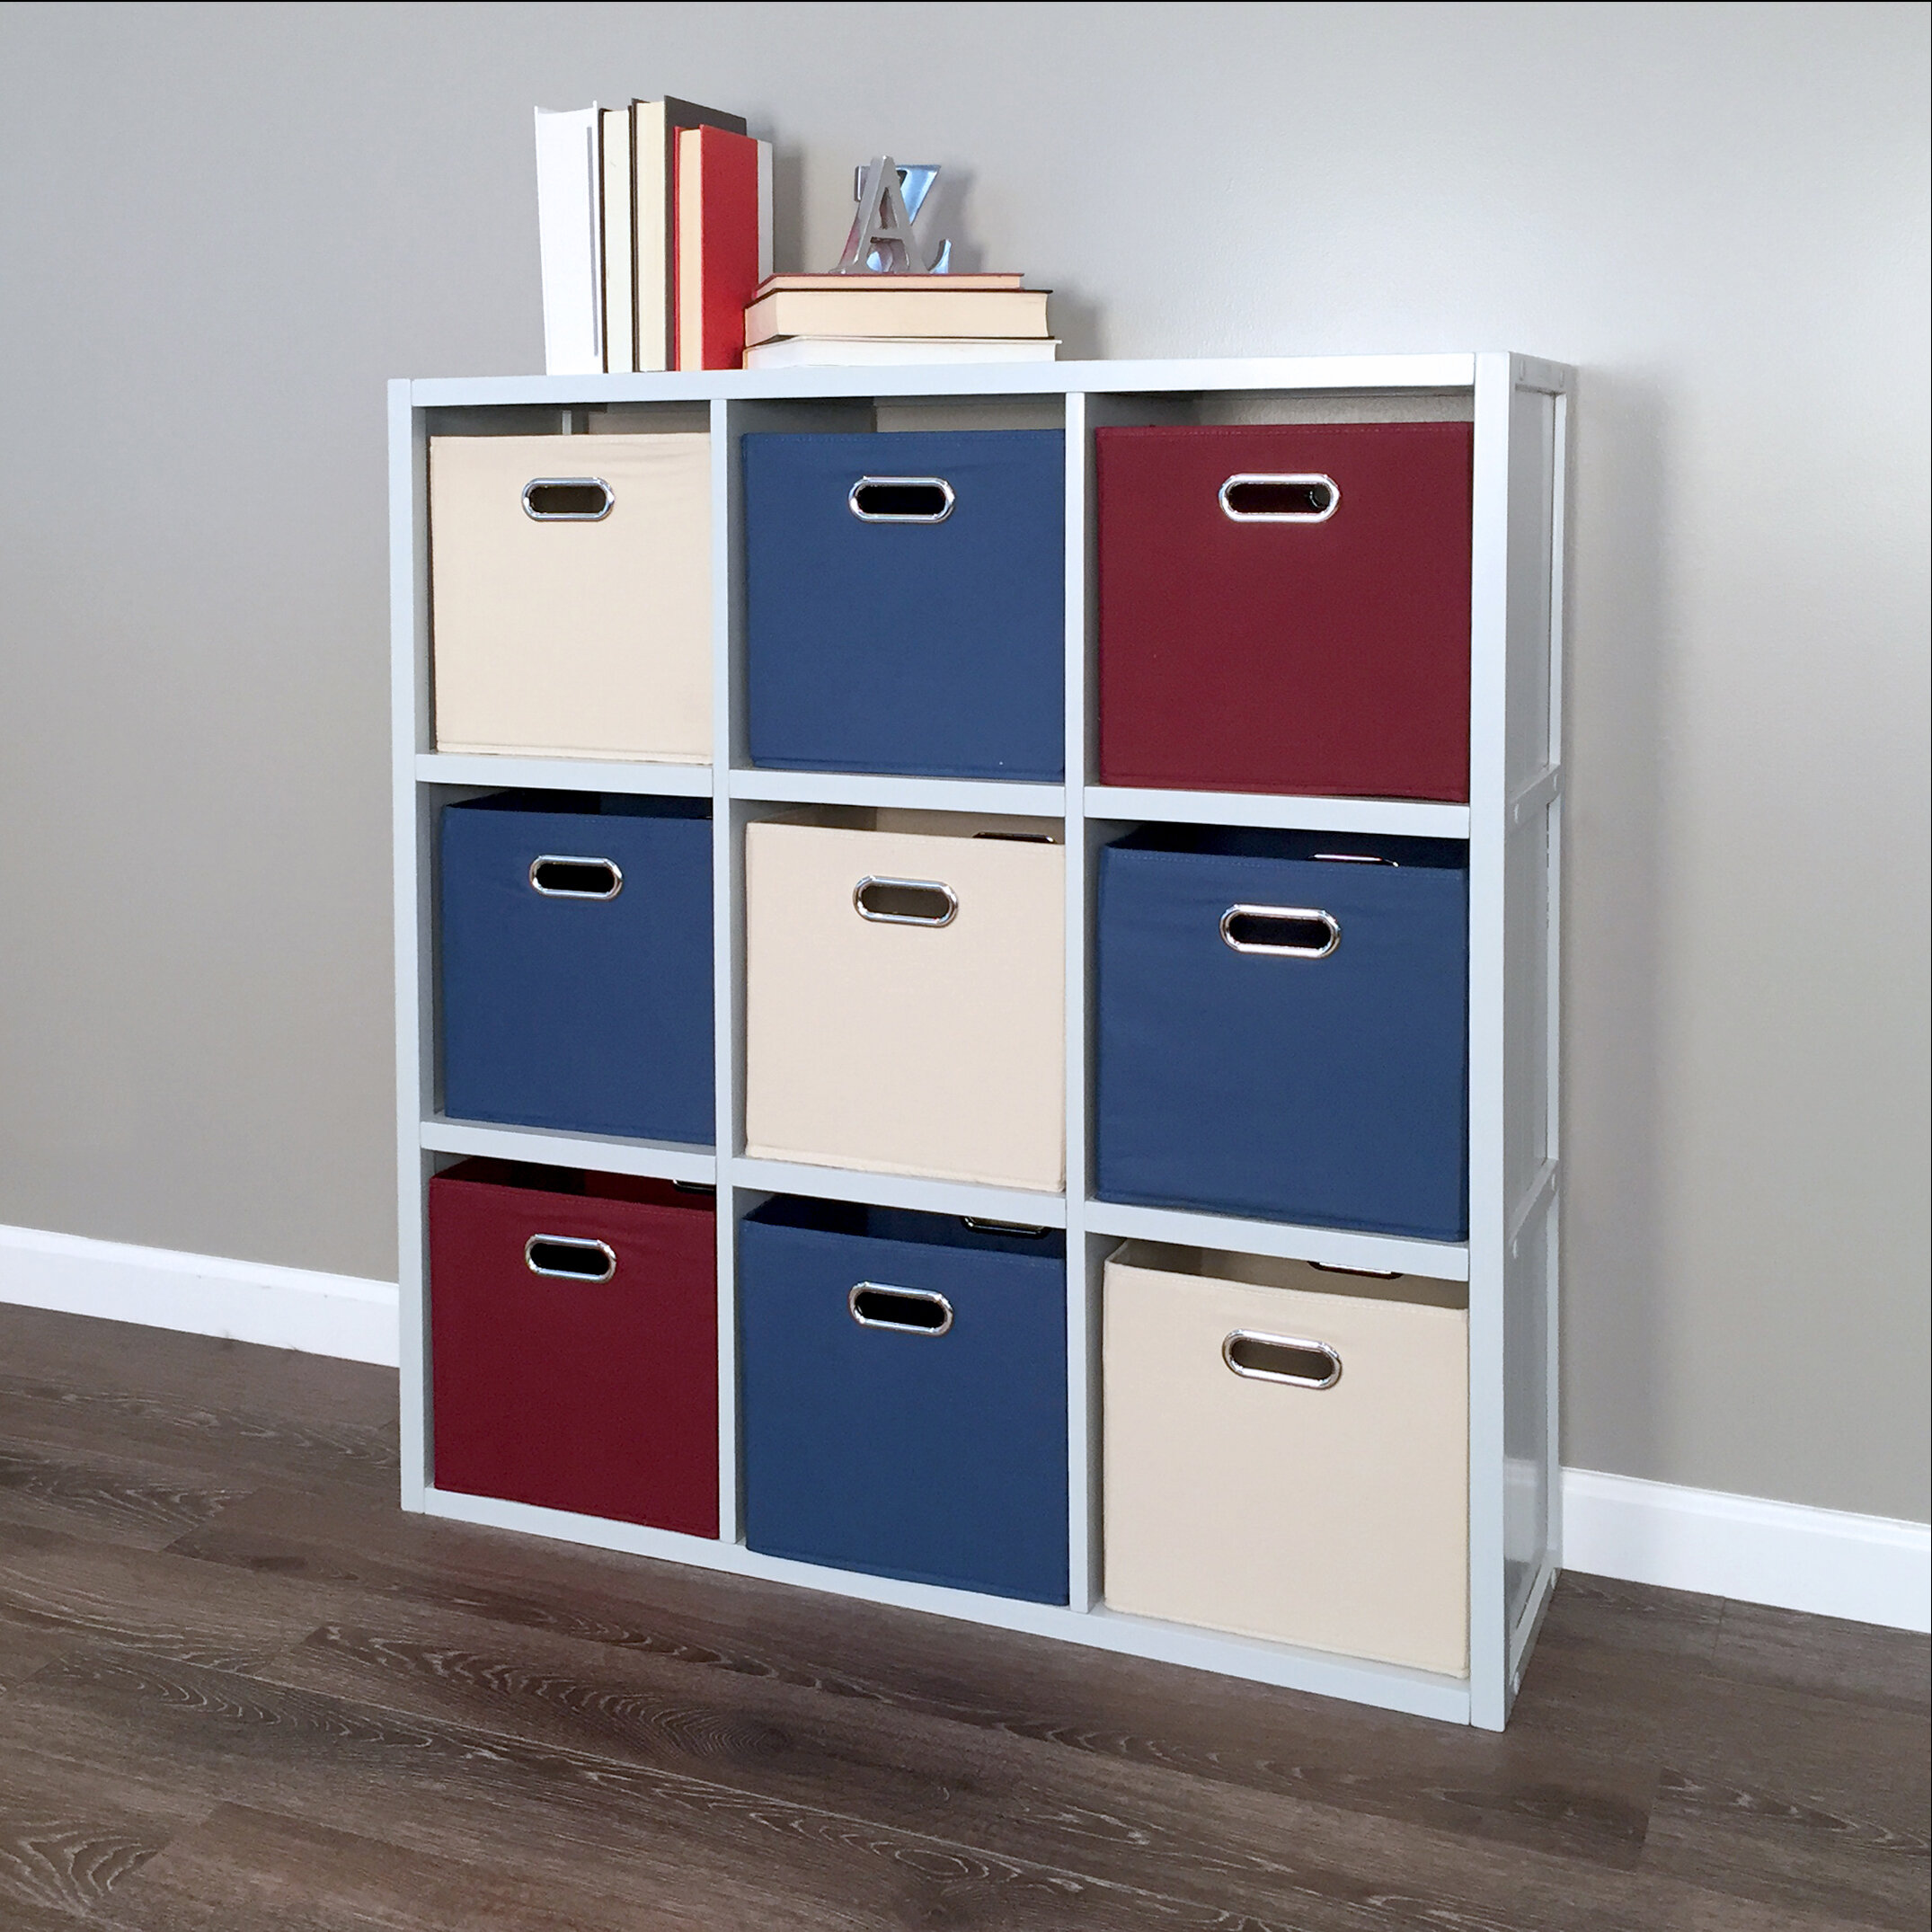 Wooden 9 Cubed Bookcase Storage Unit Shelf 9 Drawers Fabric Baskets Organisers 